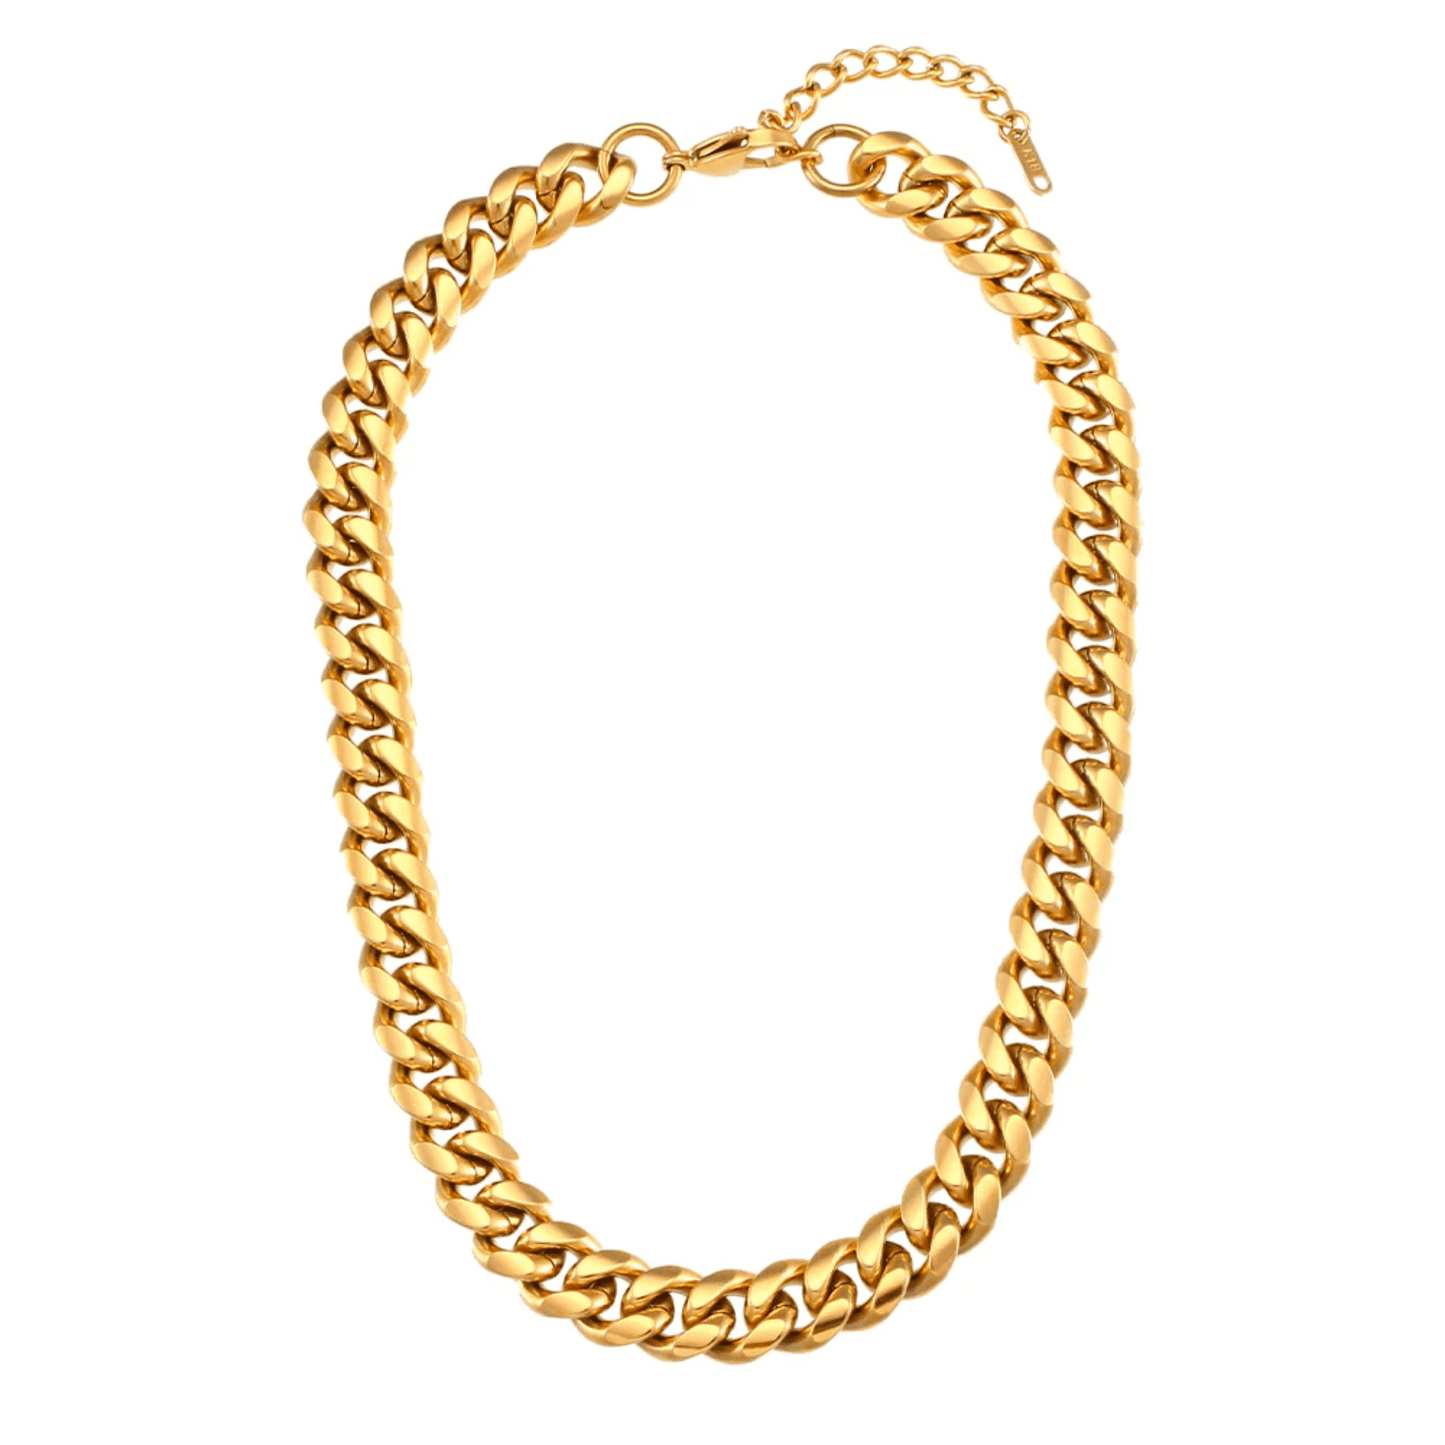 Thick Cuban Chain Necklace